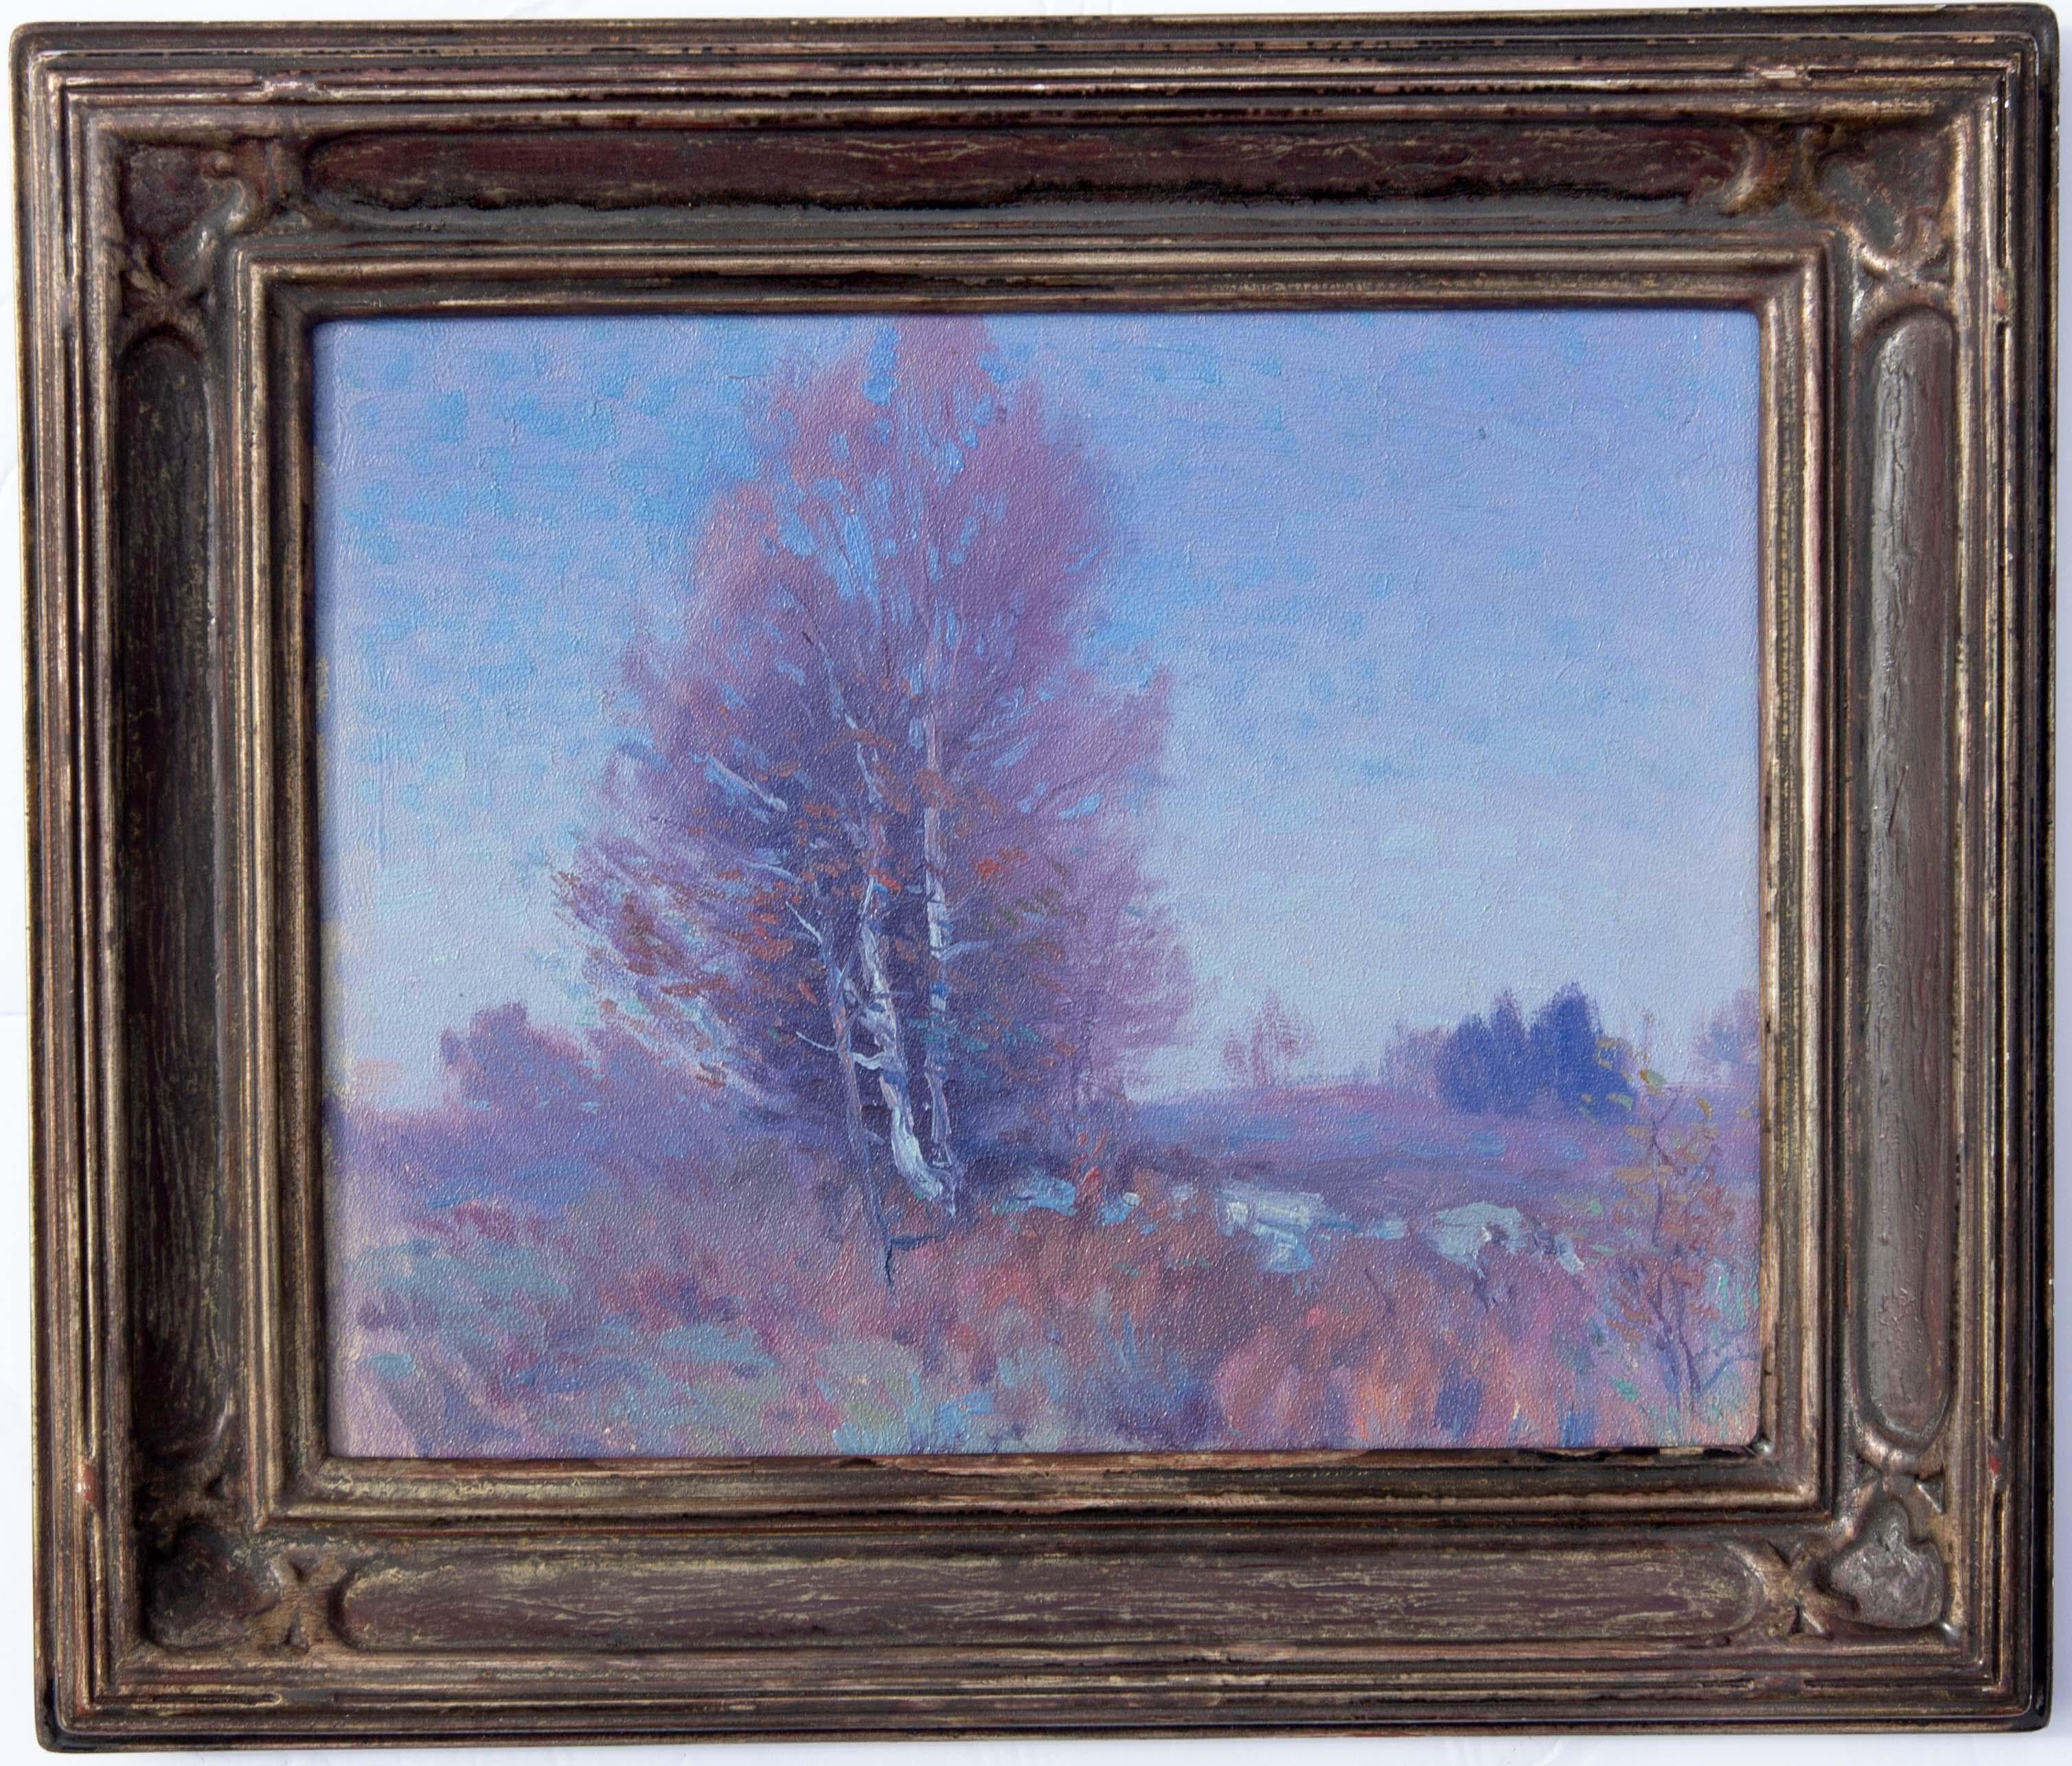 Impressionist landscape by George Renouard. Beautiful blues and mauves. Oil on academy board. Unsigned. Dated on back Oct 18 '16. 
George Renouard, was born in Rochester, New York and lived much of his life in Brooklyn and Manhattan, was a graphic